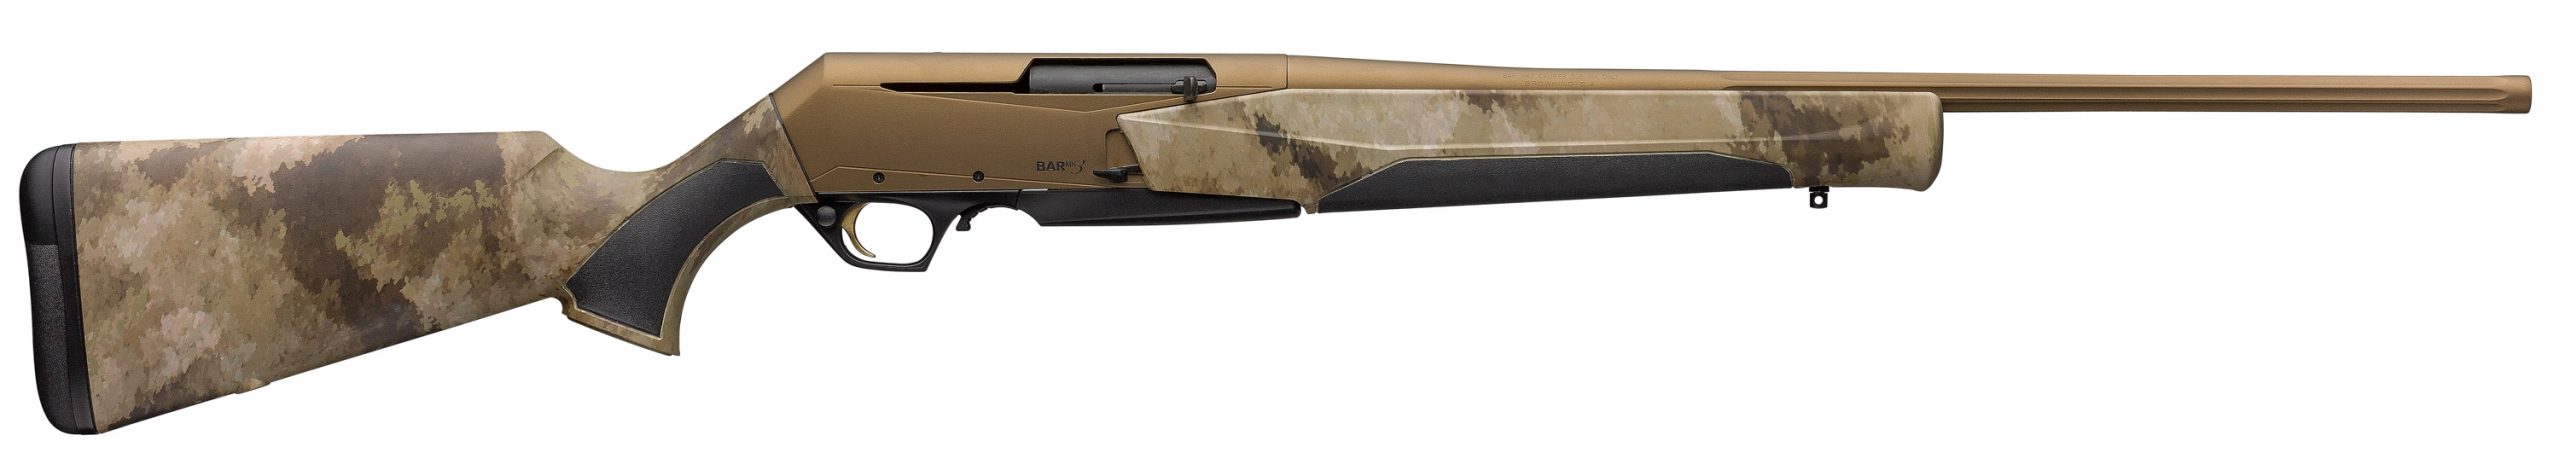 Browning Bar Mkiii Spd Ataca 7Mm08 22″ Hells Canyon Speed | A-Tacs Br031 064211 Scaled